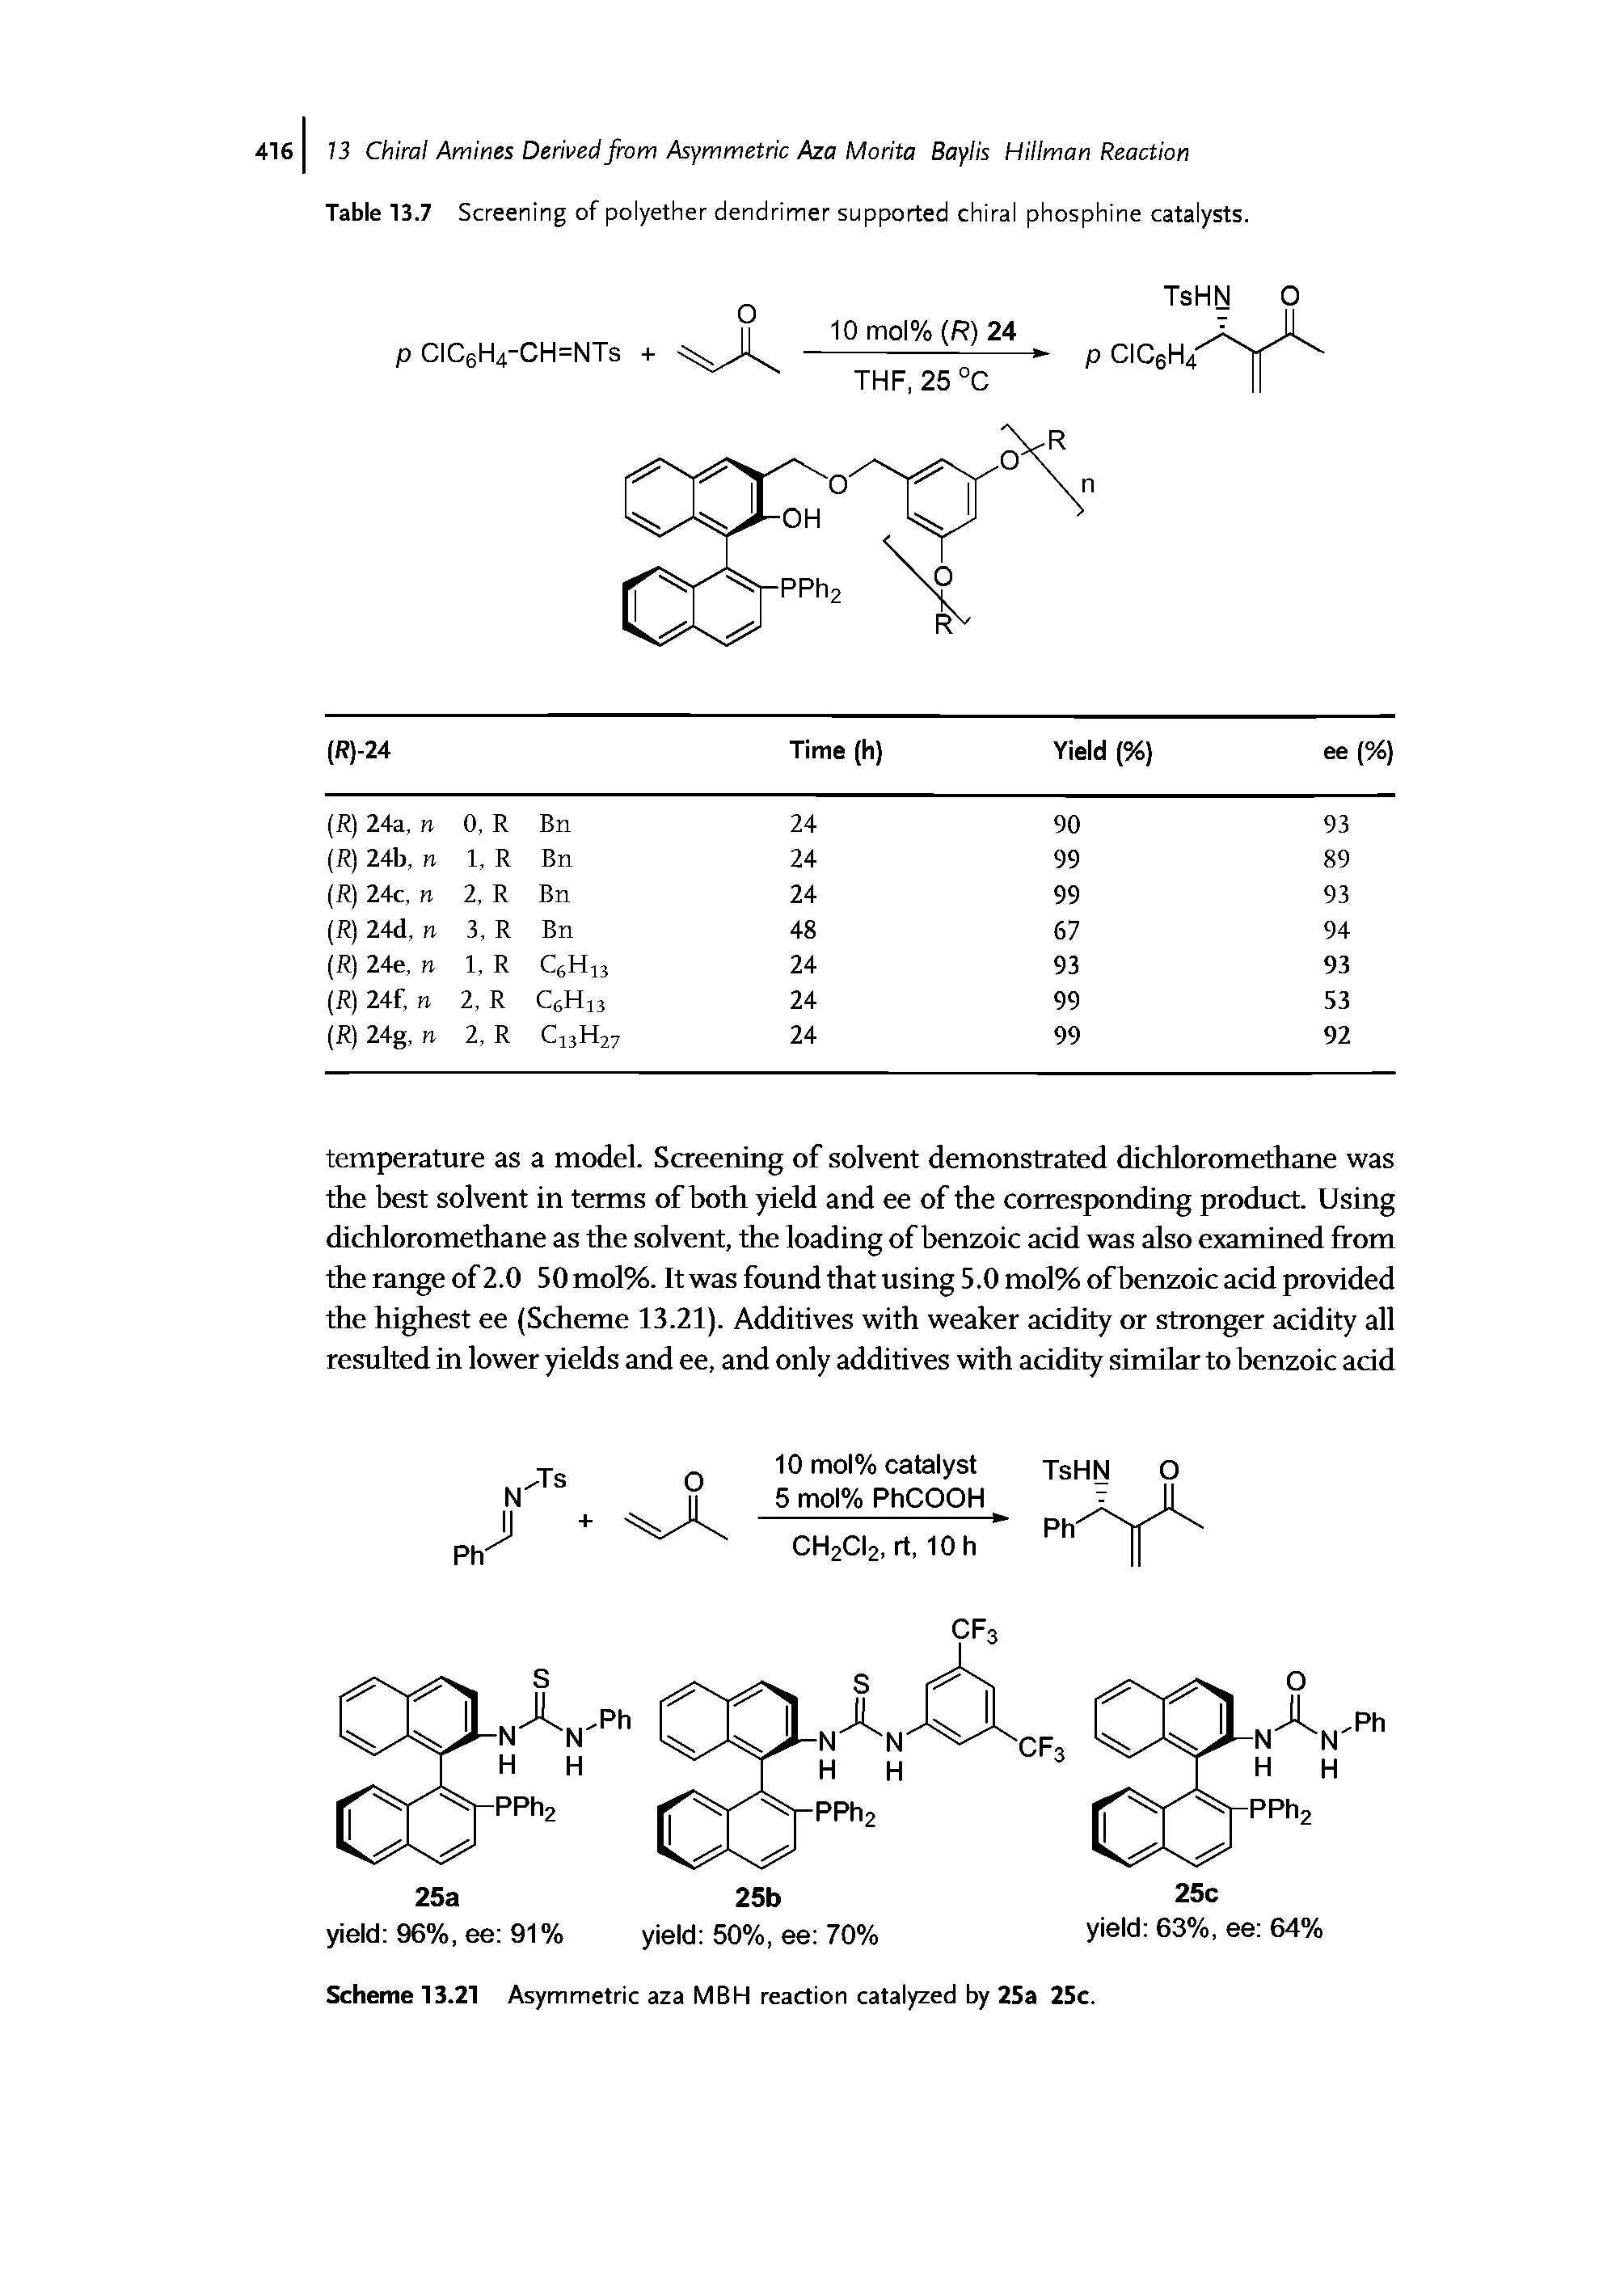 Table 13.7 Screening of polyether dendrimer supported chiral phosphine catalysts.